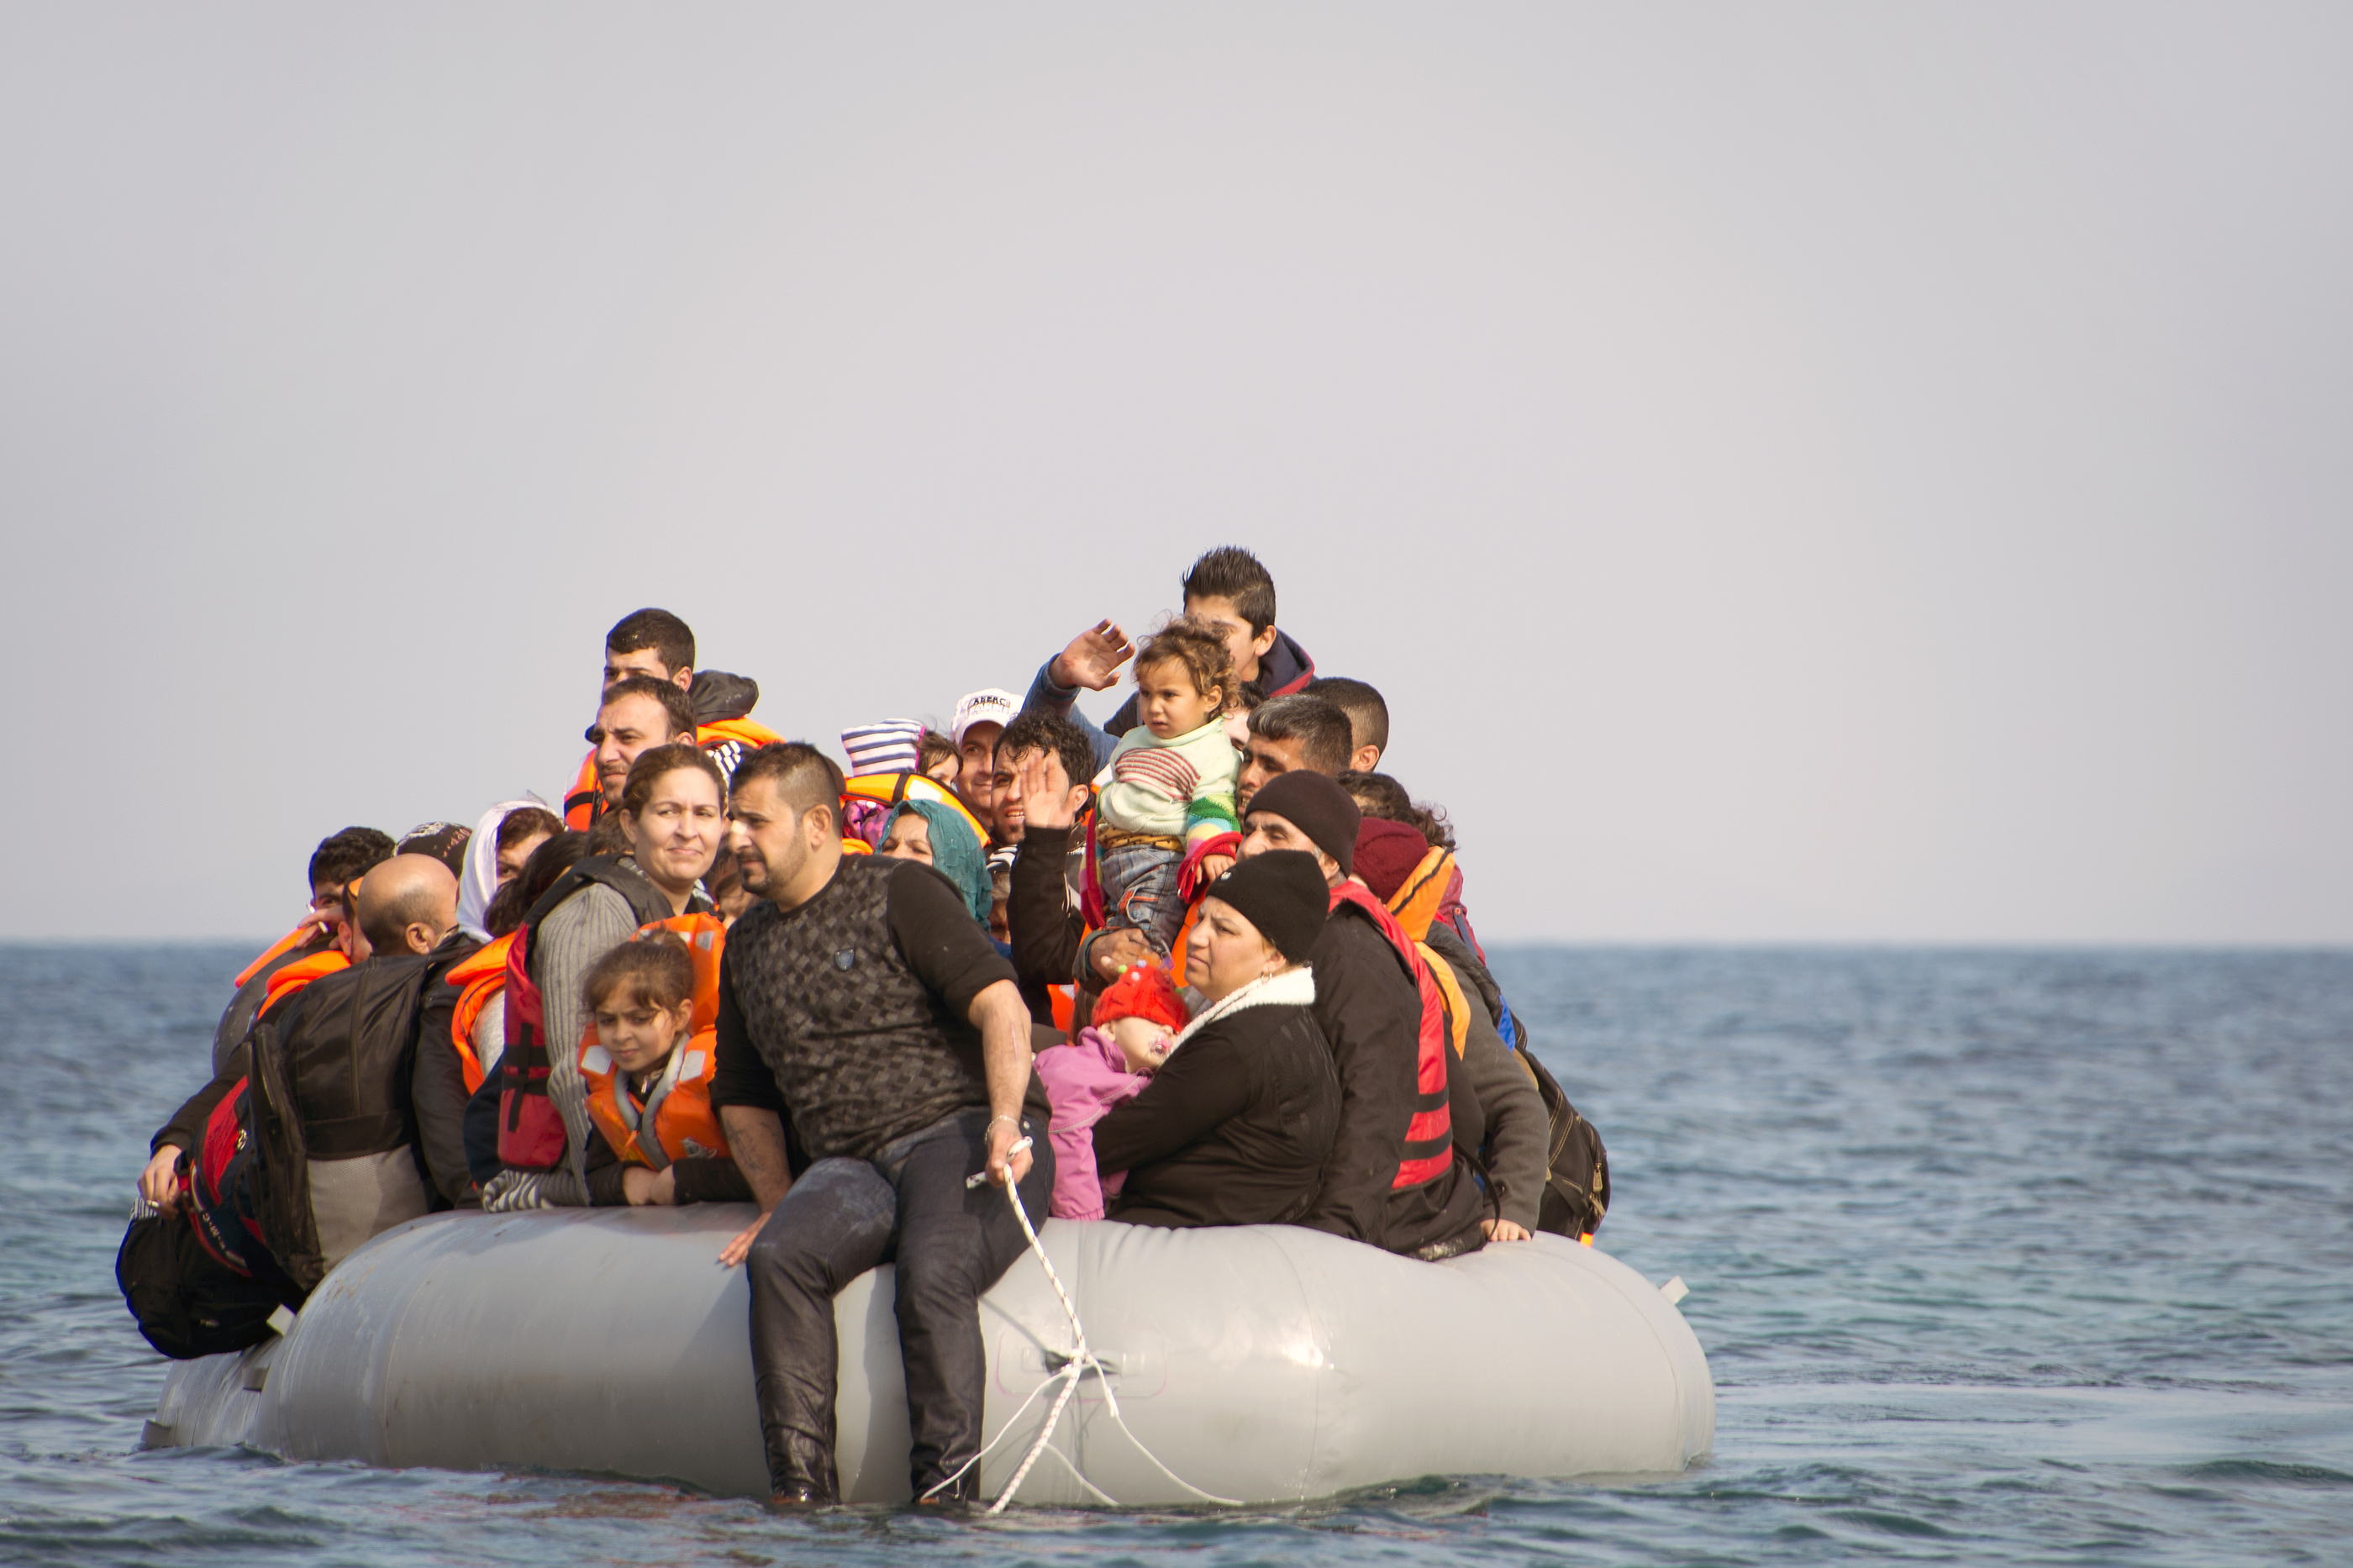 Migrant refugees in boat